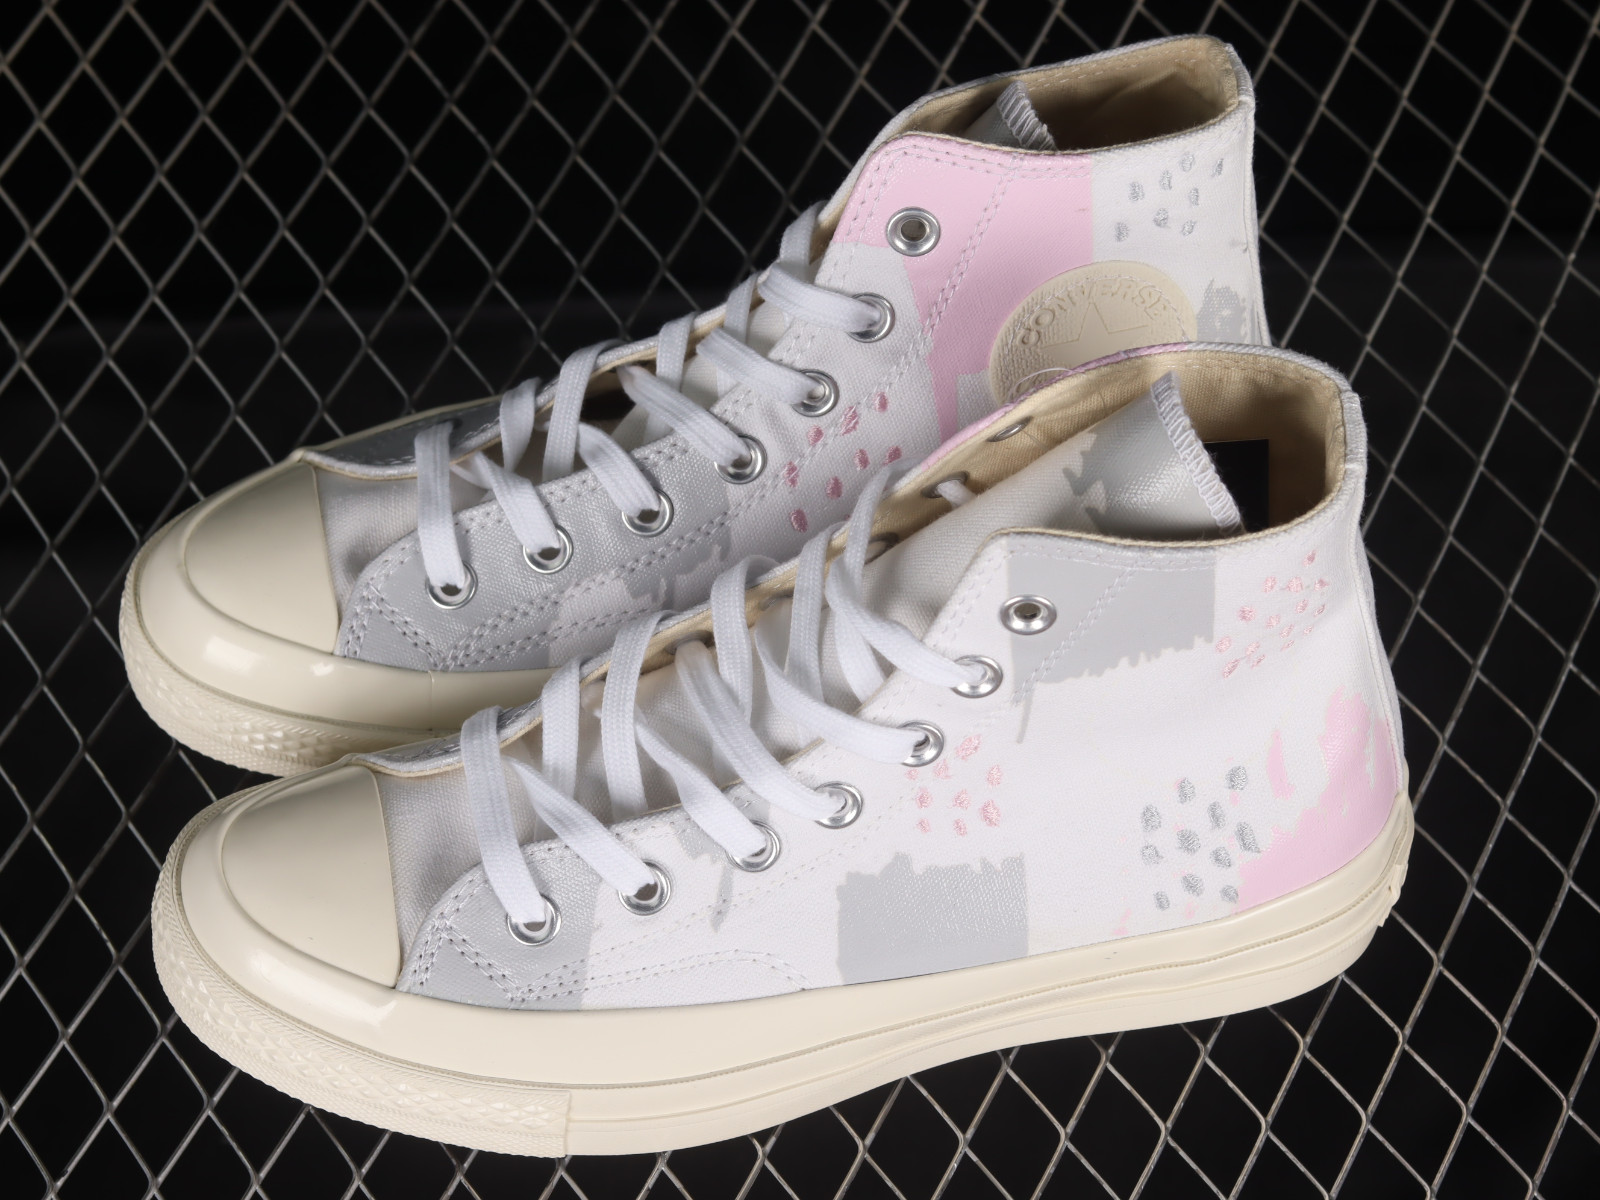 Chuck Taylor All Star 1970s High White Gray Pink A04214C - GmarShops